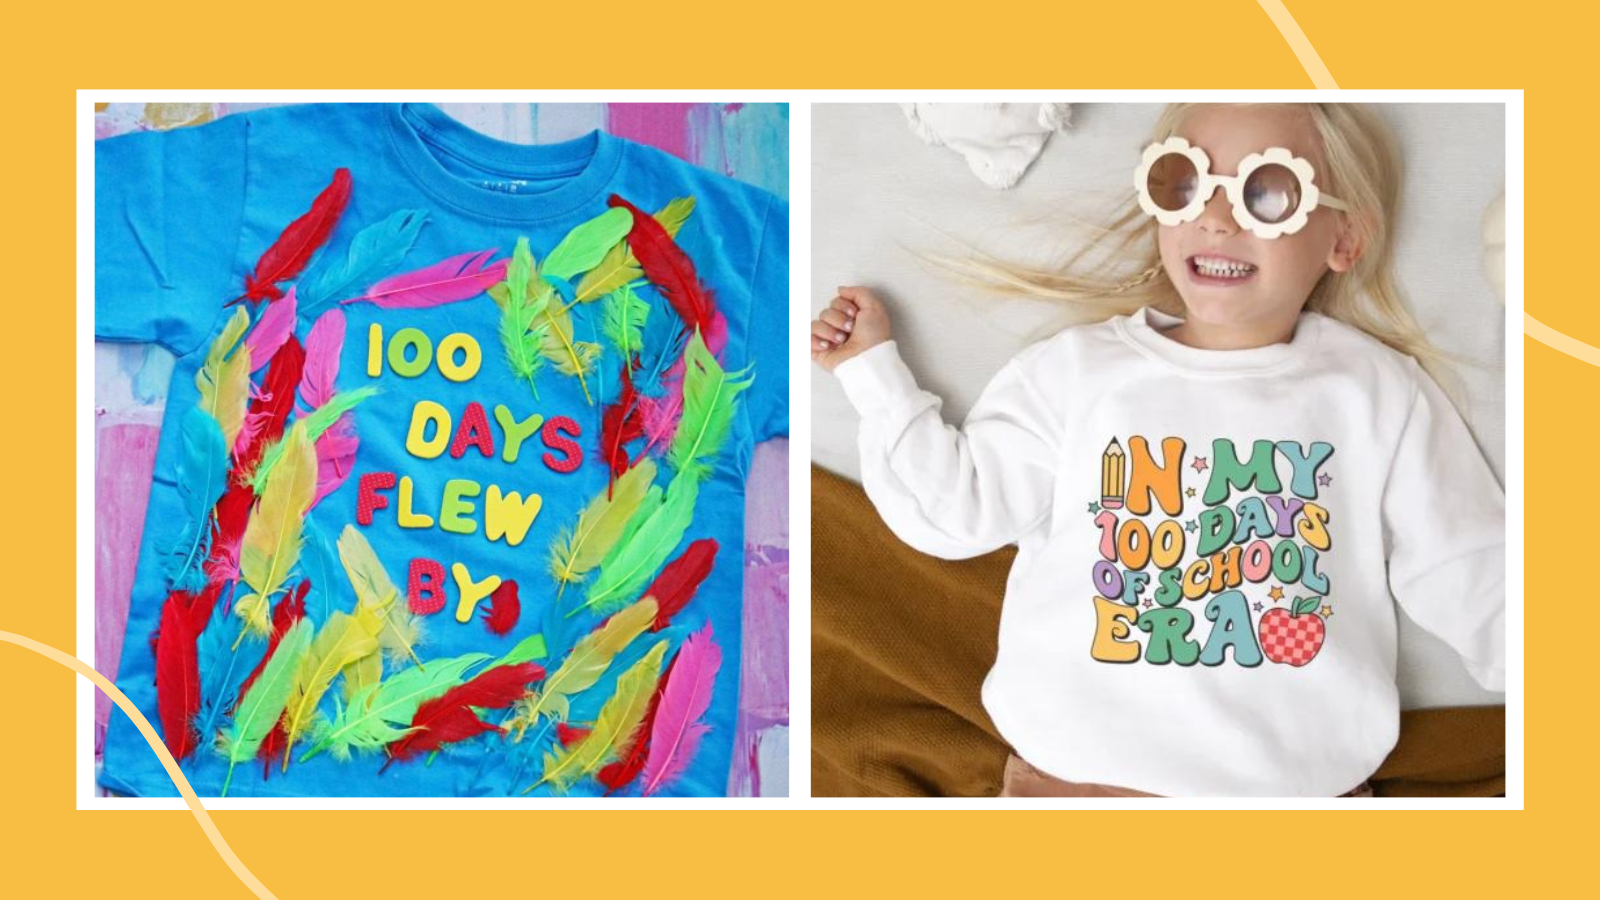 Examples of 100th Day of School Shirts, including 100 Days Flew By with feather glued to blue shirt and girl with sunglasses wearing an in my 100 days of school era.